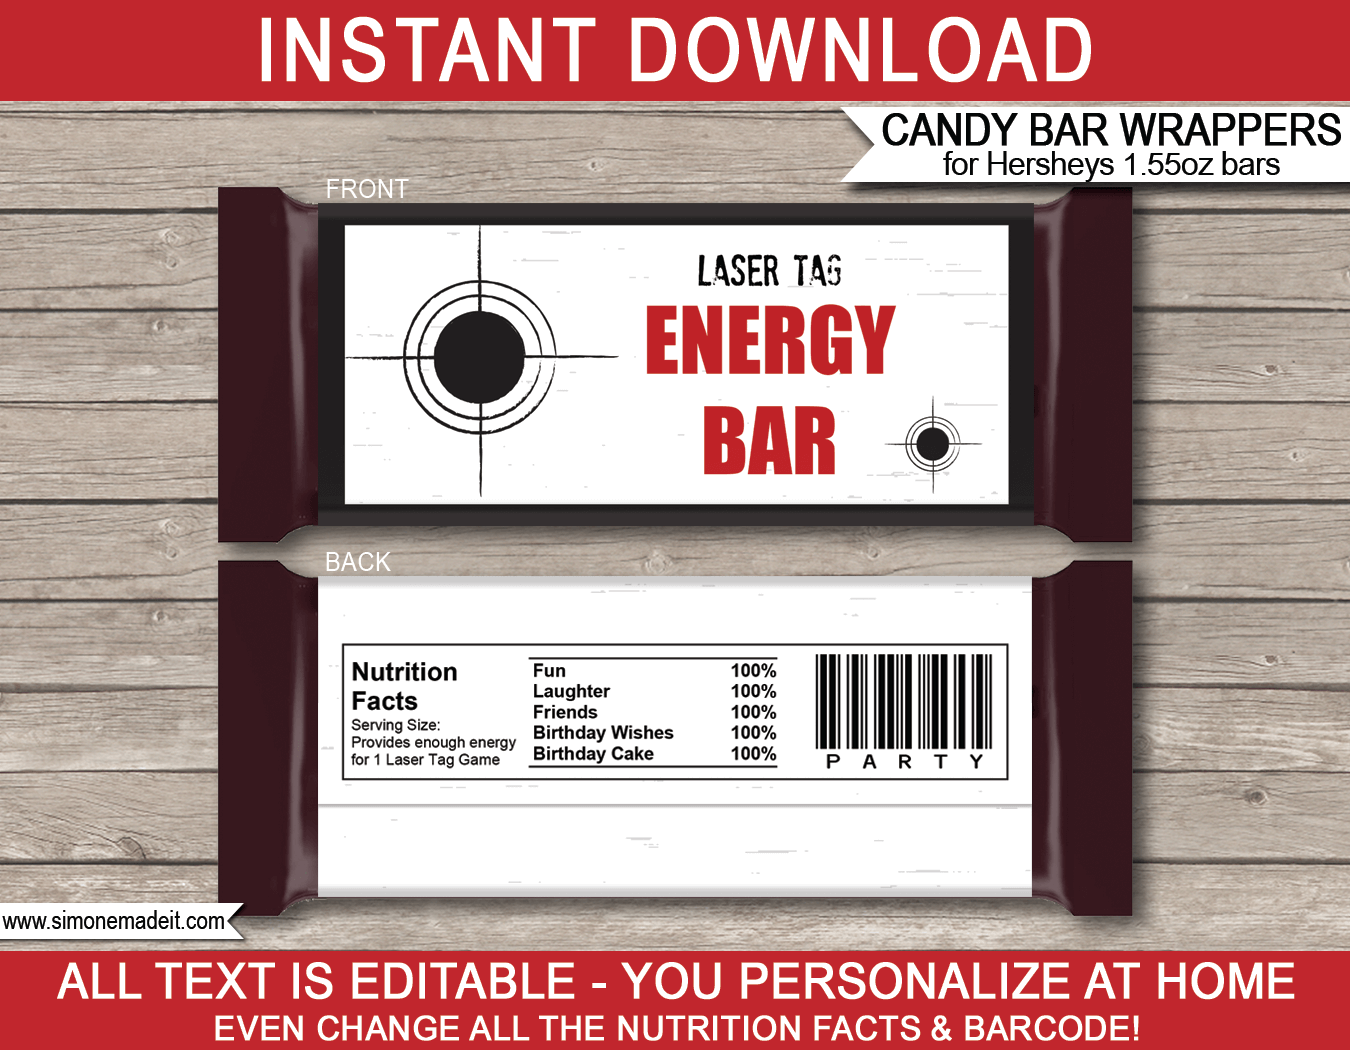 Laser Tag Hershey Candy Bar Wrappers | Lazer Tag | Birthday Party Favors | Personalized Candy Bars | Editable Template | INSTANT DOWNLOAD $3.00 via simonemadeit.com